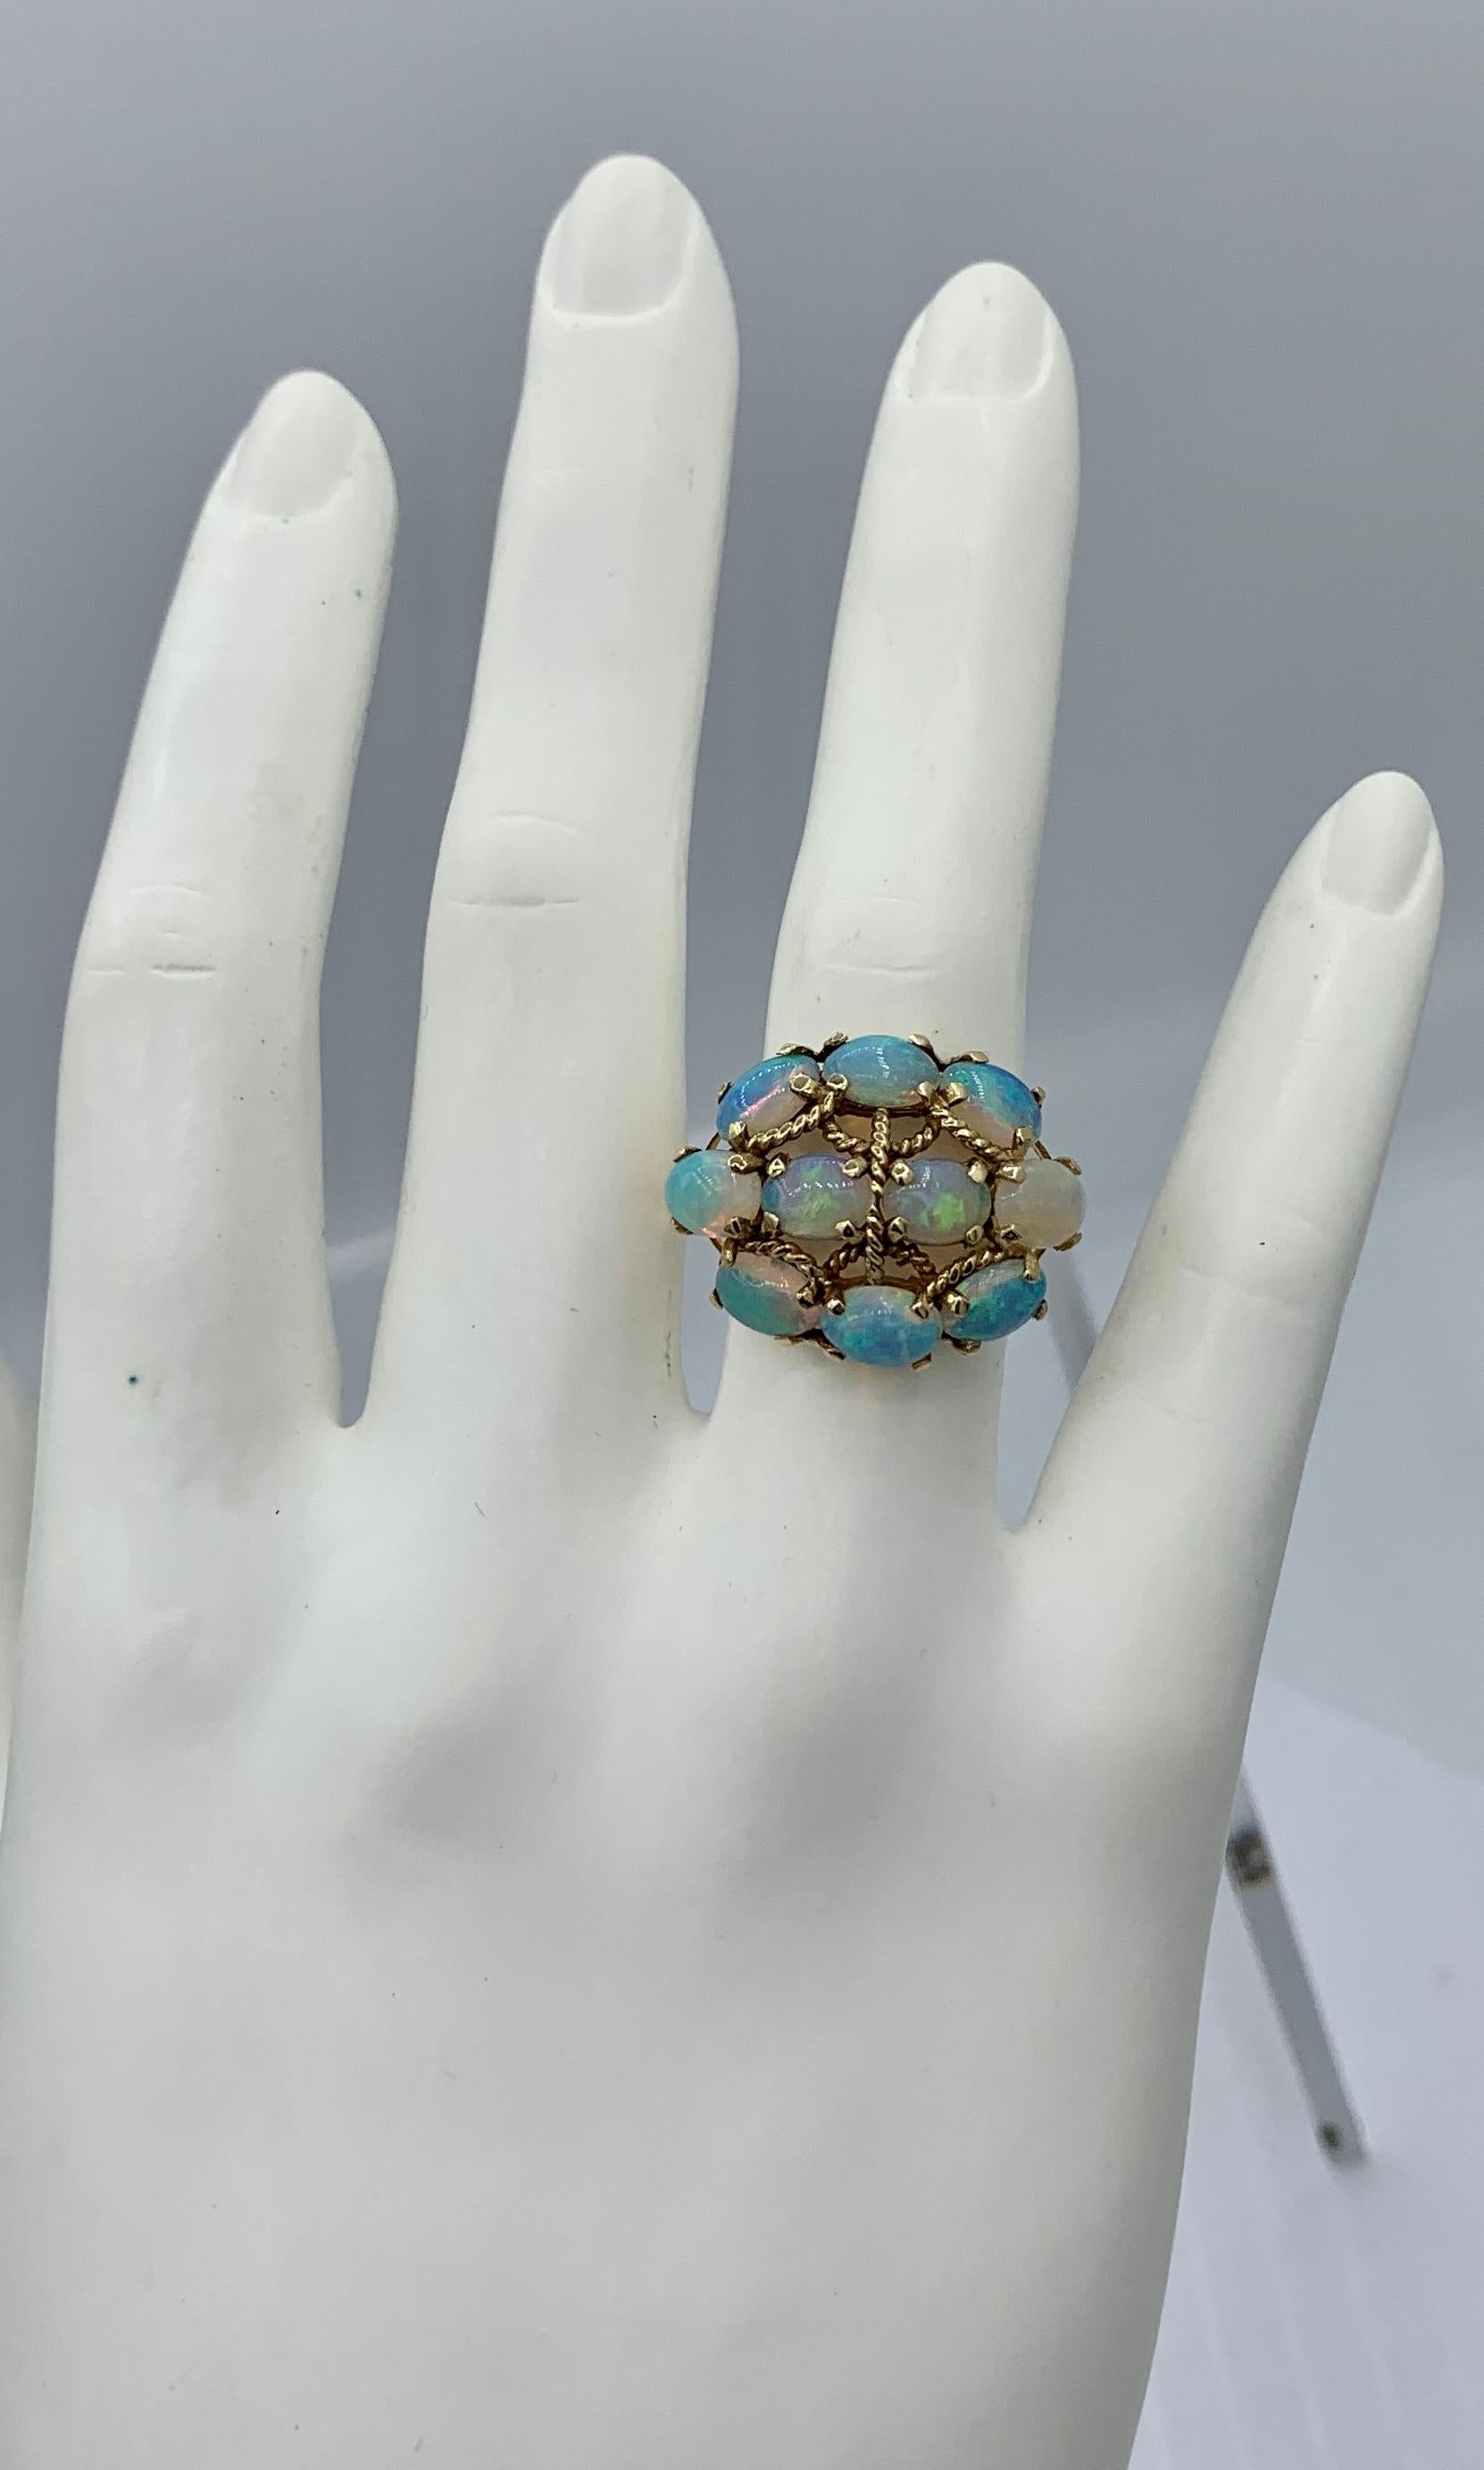 THIS IS A WONDERFUL MID-CENTURY MODERNIST EAMES ERA 2 CARAT OPAL RING IN 14K YELLOW GOLD WITH A STUNNING OVAL OPAL CABOCHON GEM.
The effect of the gorgeous natural opal in the wondrous mid-century geometric design in 14K yellow gold create a magical